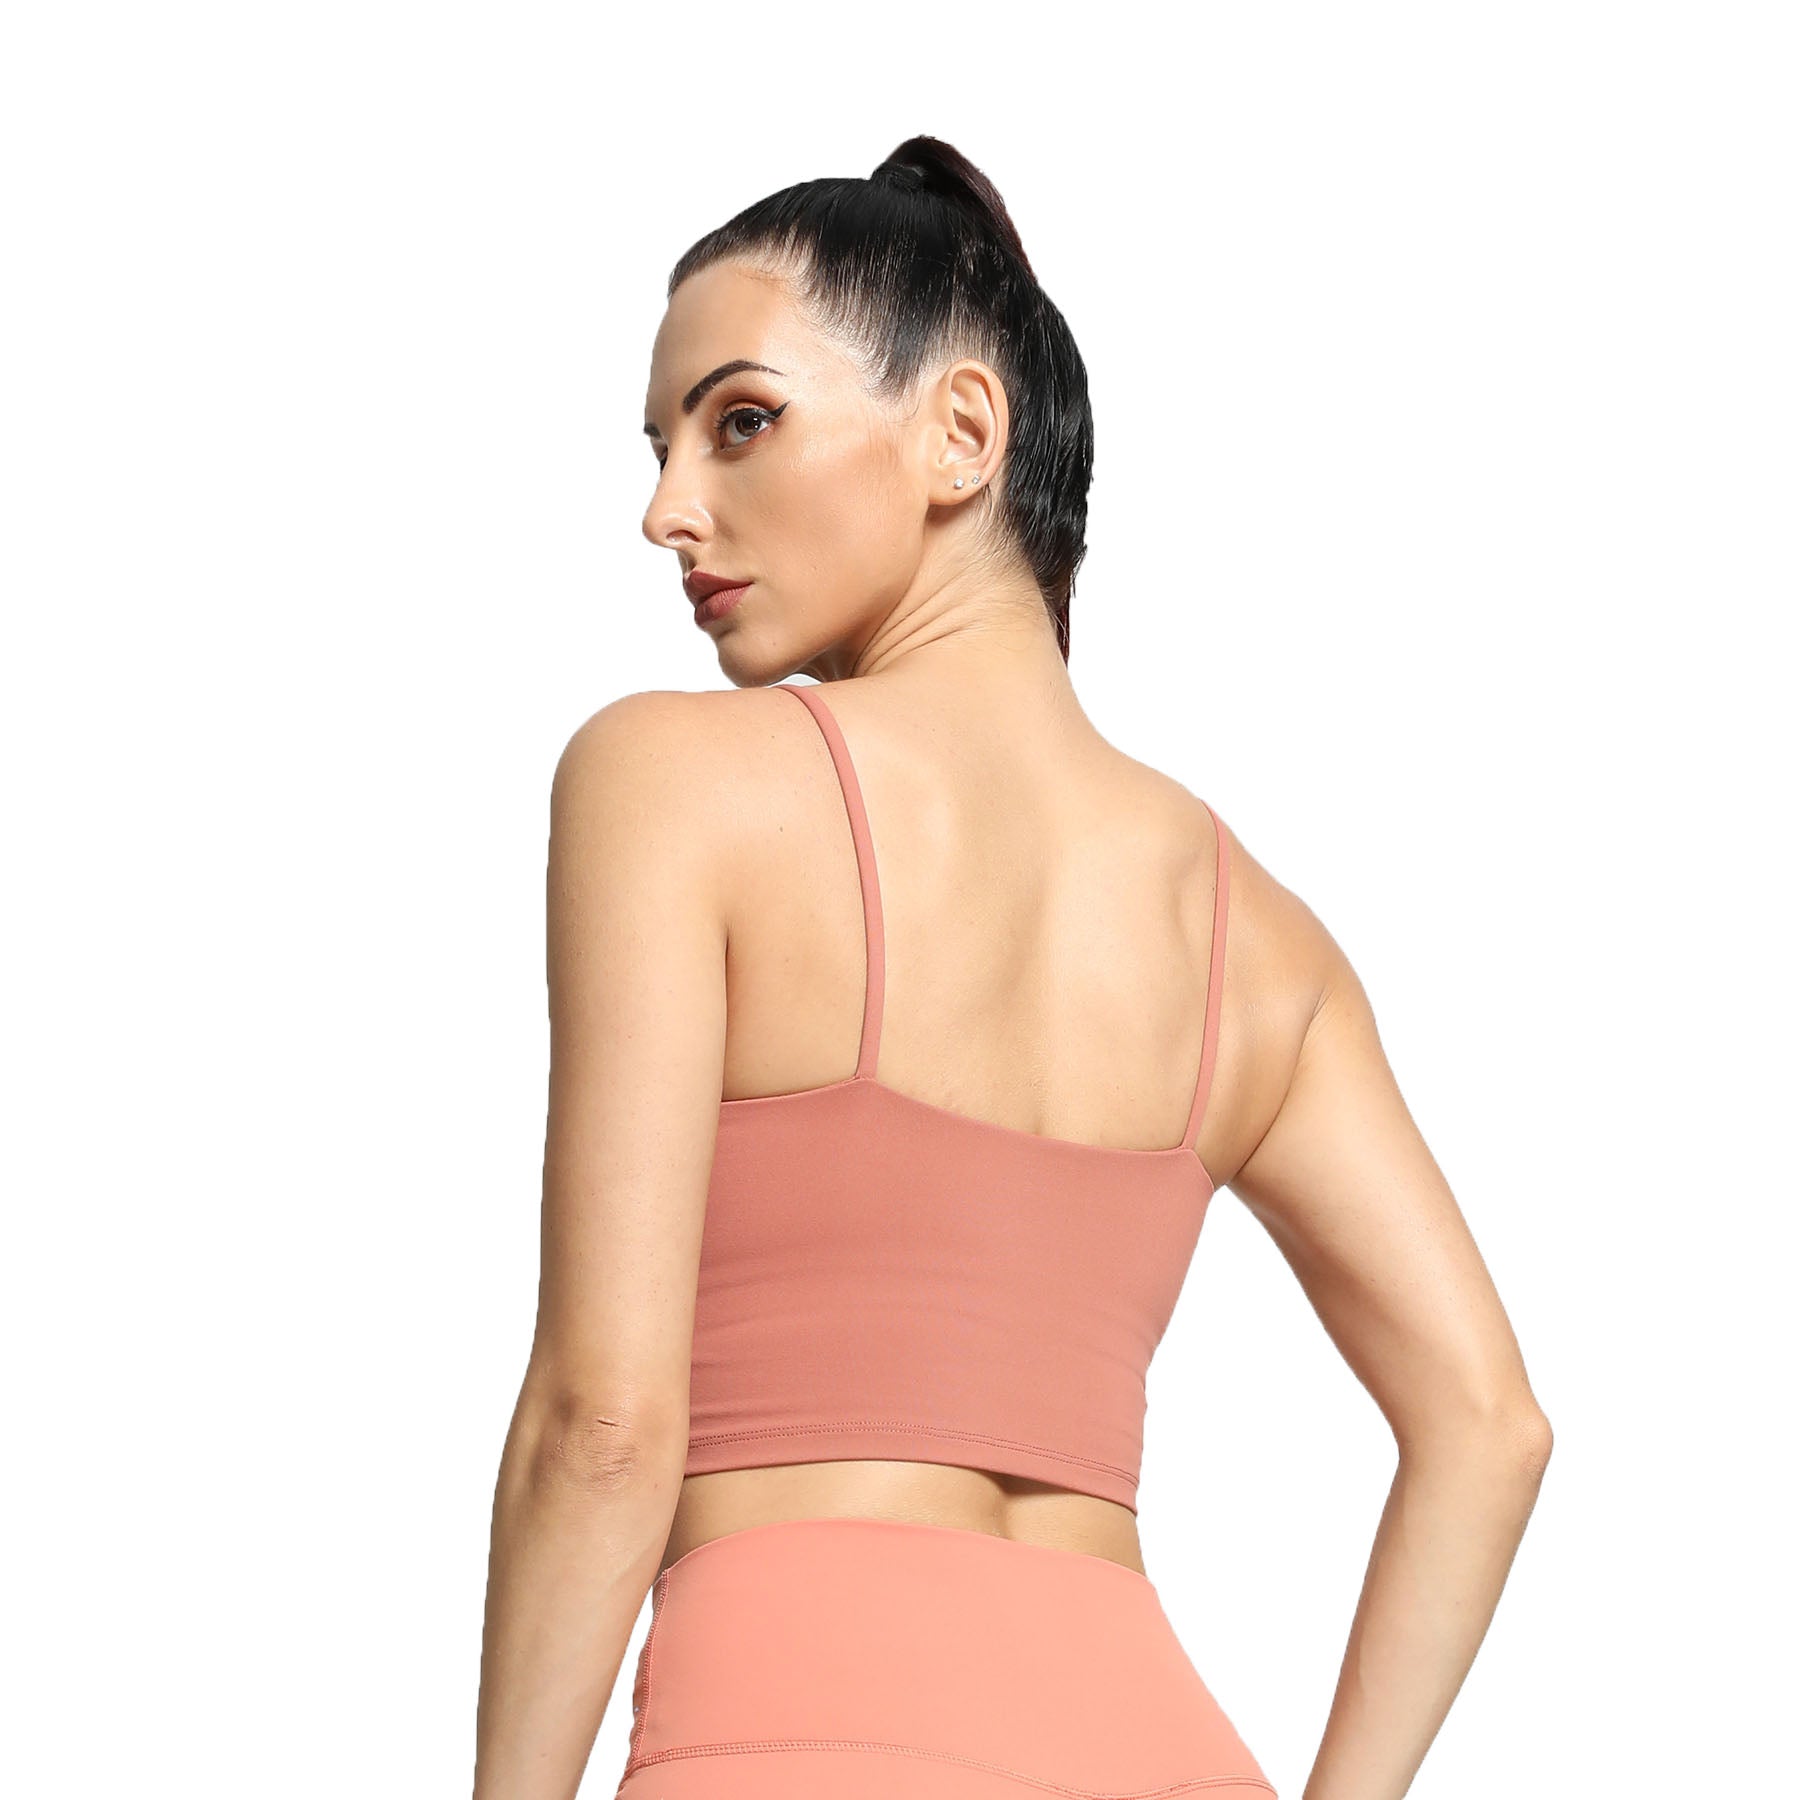 Aoxjox Buttery Soft Solid Color Sports Bra Crop Top